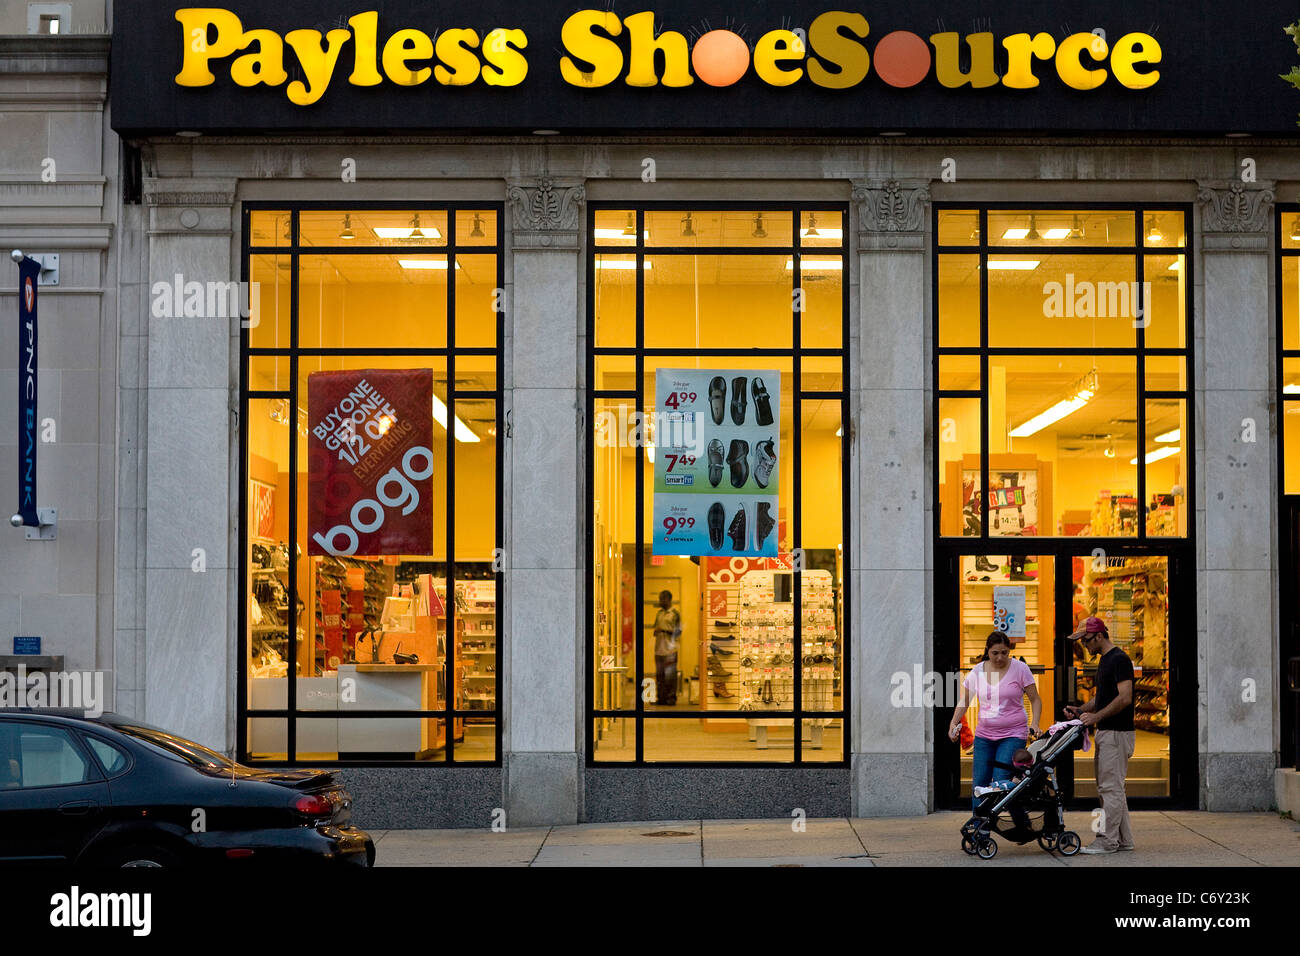 A Payless ShoeSource retail store.  Stock Photo